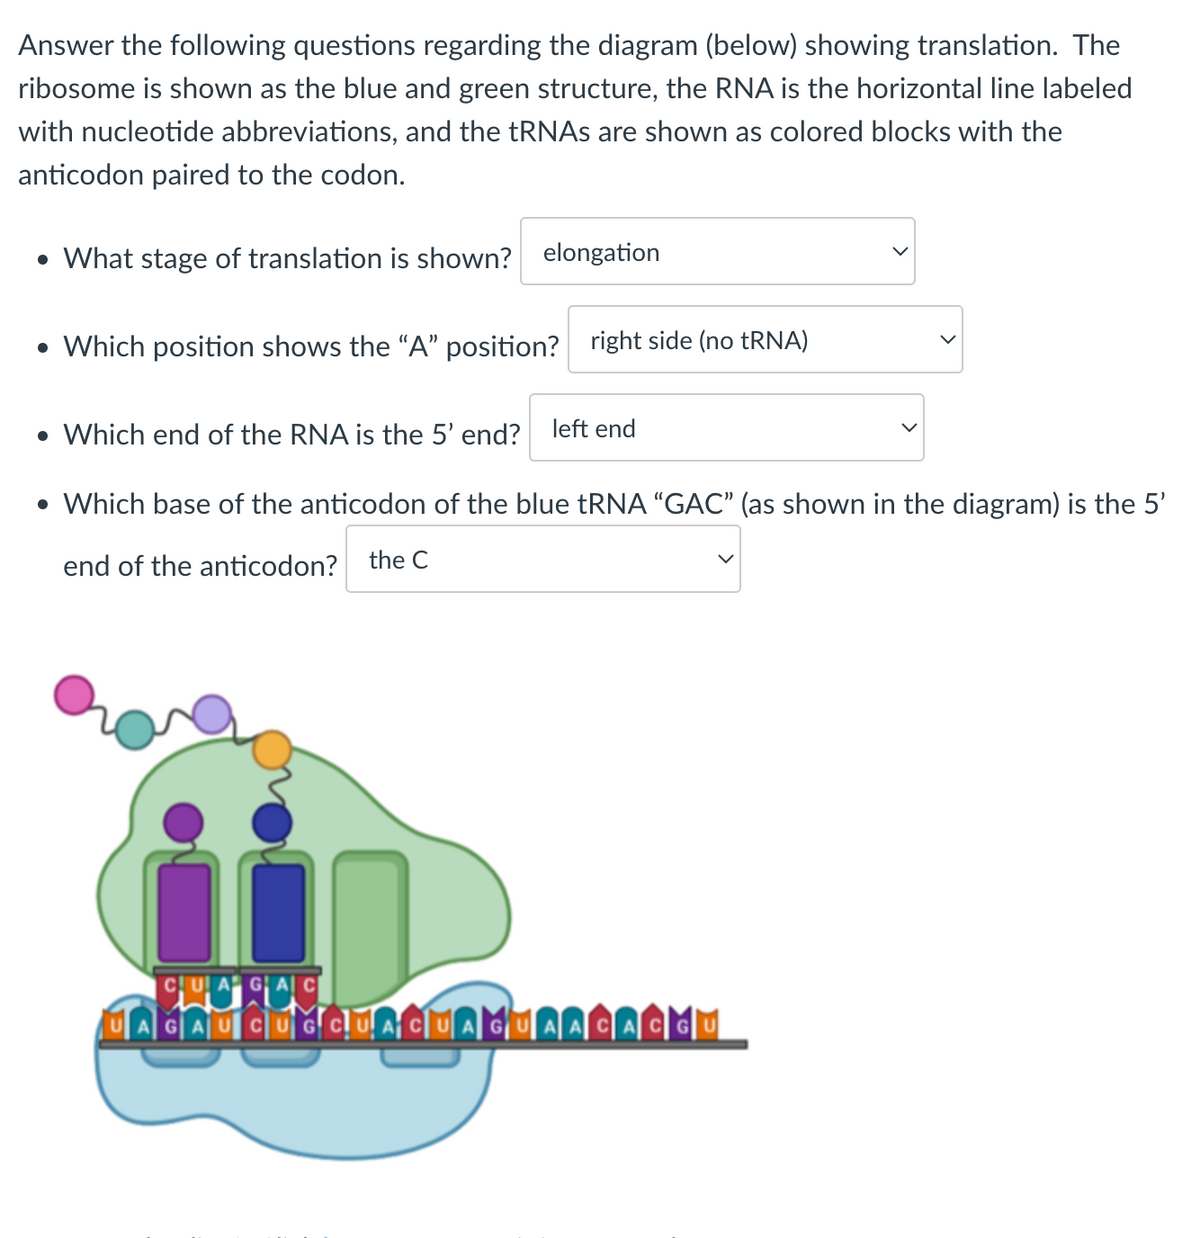 Answer the following questions regarding the diagram (below) showing translation. The
ribosome is shown as the blue and green structure, the RNA is the horizontal line labeled
with nucleotide abbreviations, and the tRNAs are shown as colored blocks with the
anticodon paired to the codon.
• What stage of translation is shown? elongation
• Which position shows the "A" position? right side (no tRNA)
• Which end of the RNA is the 5' end?
left end
• Which base of the anticodon of the blue tRNA "GAC" (as shown in the diagram) is the 5'
end of the anticodon?
the C
CUAGAC
UAGAUCUGCUACUAGUAACACĞU